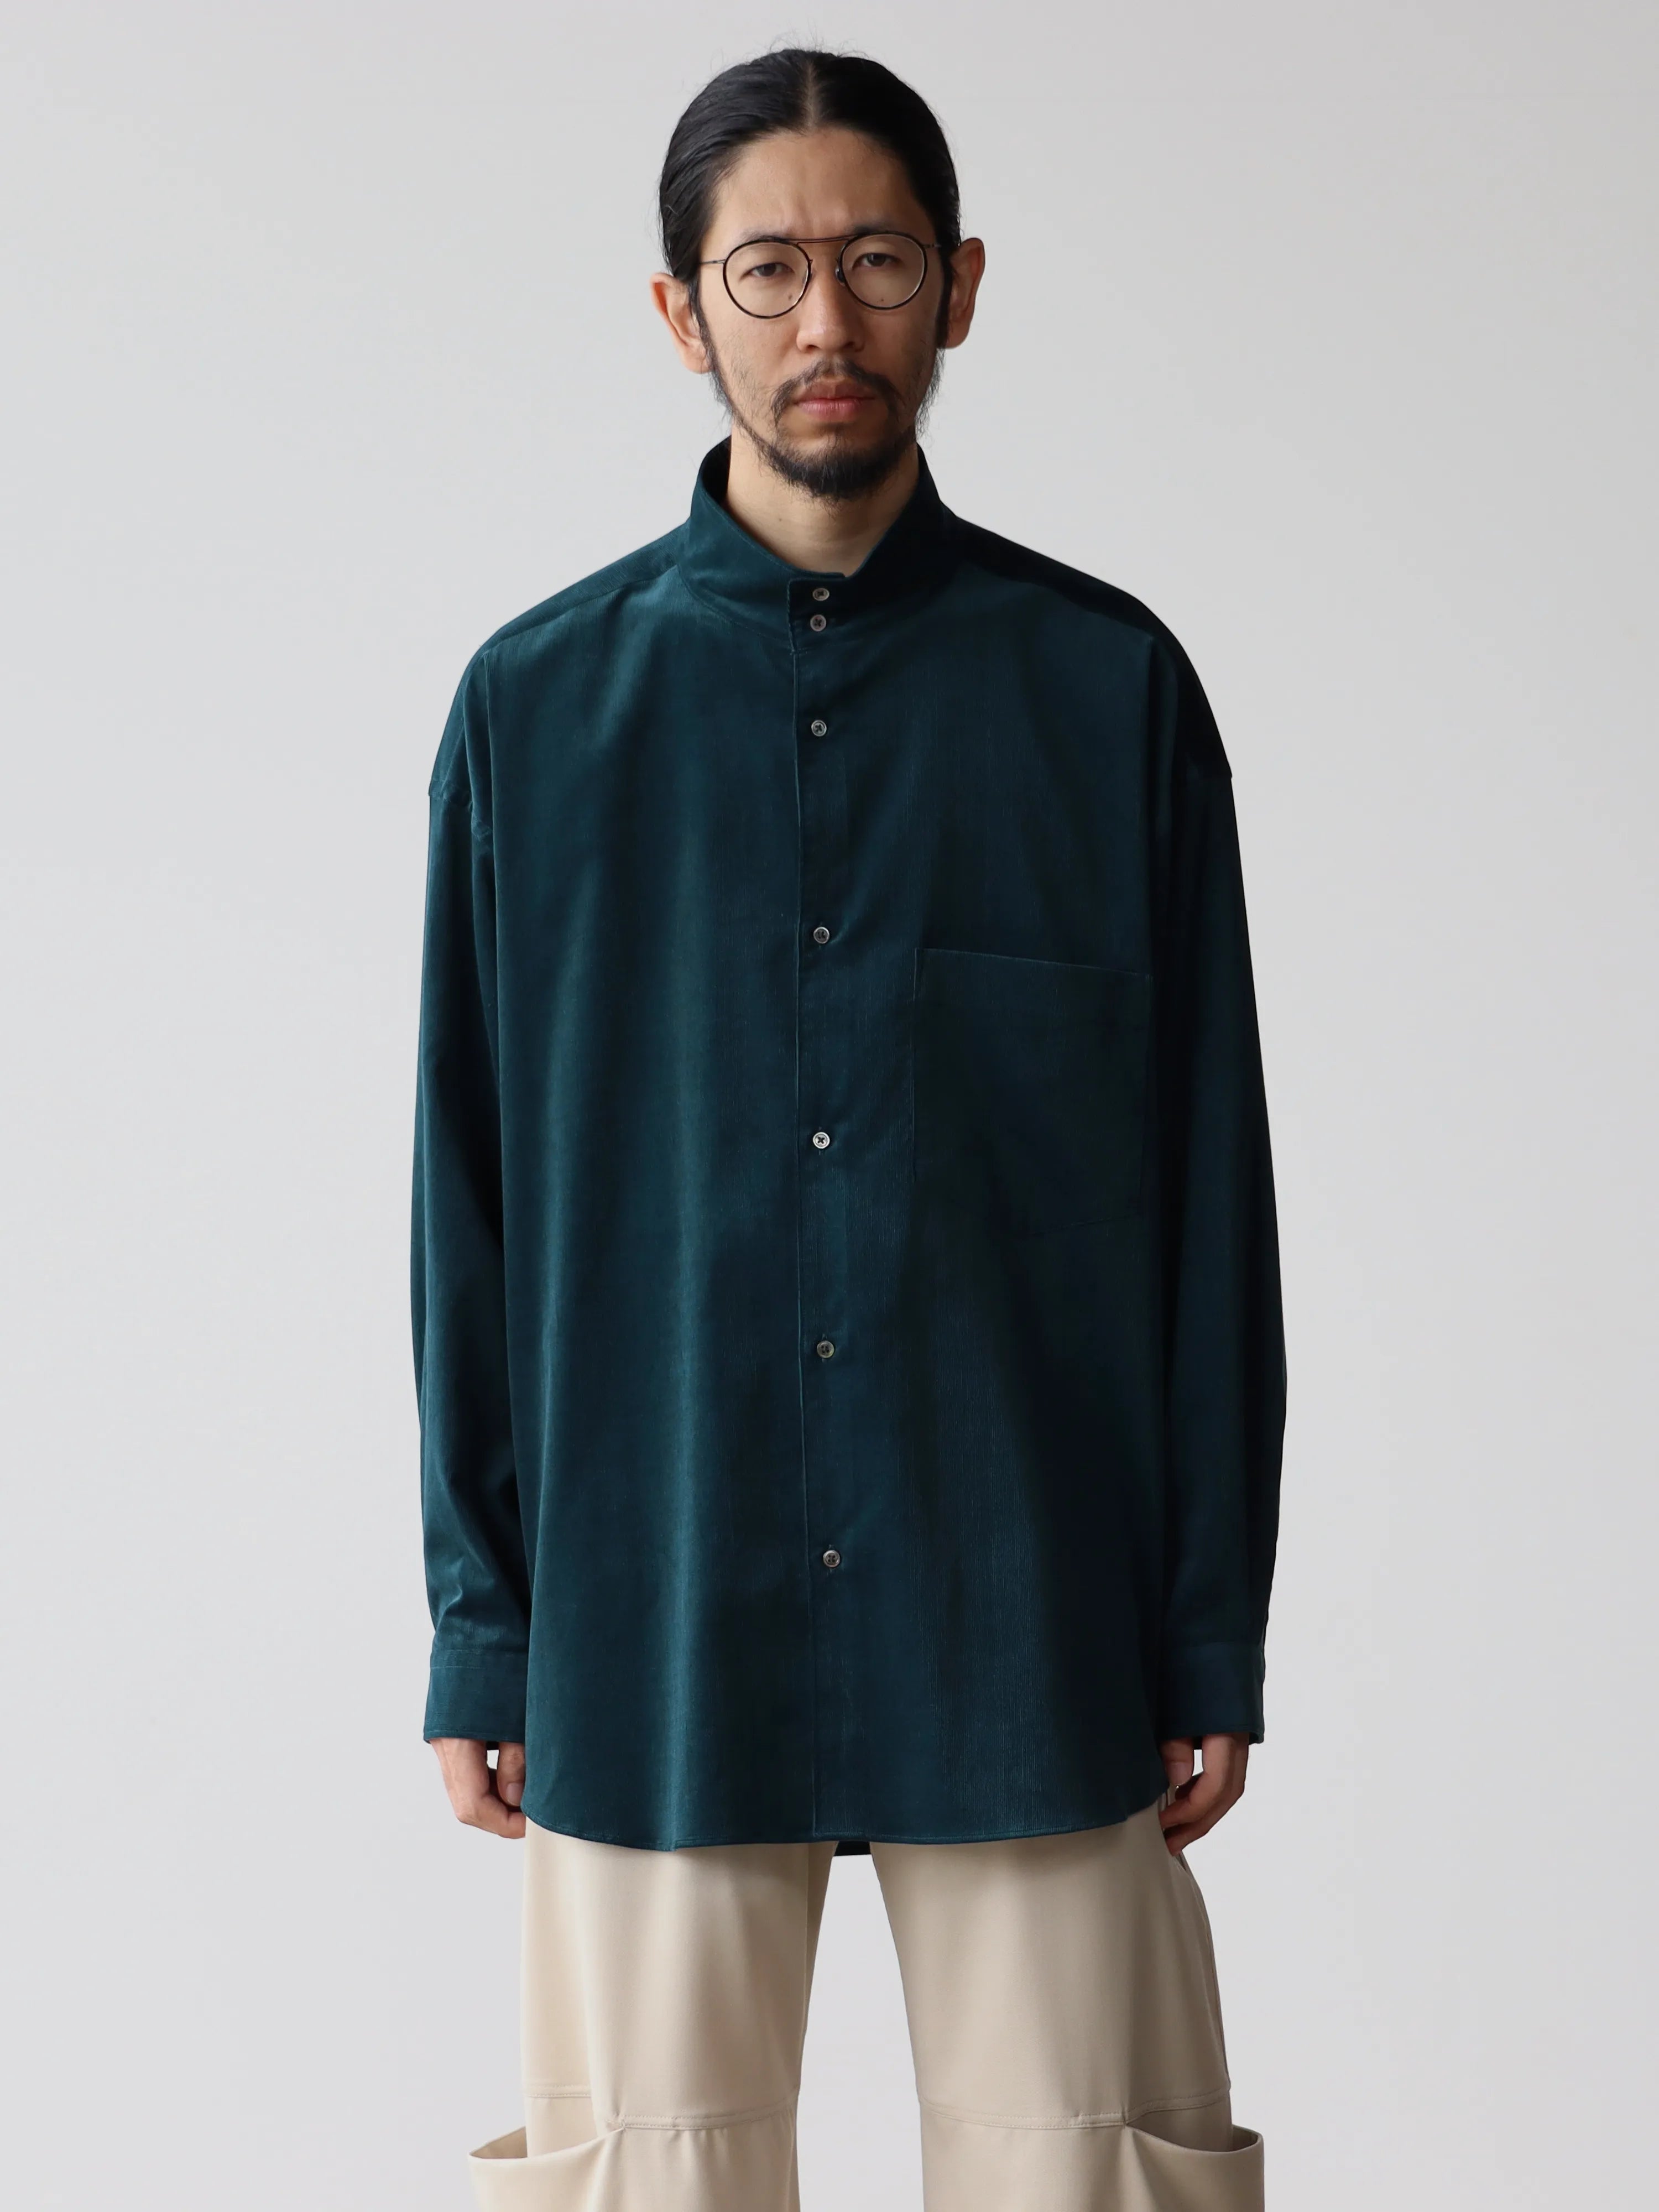 SuvinCoGraphpaper Suvin Corduroy Shirt - トップス